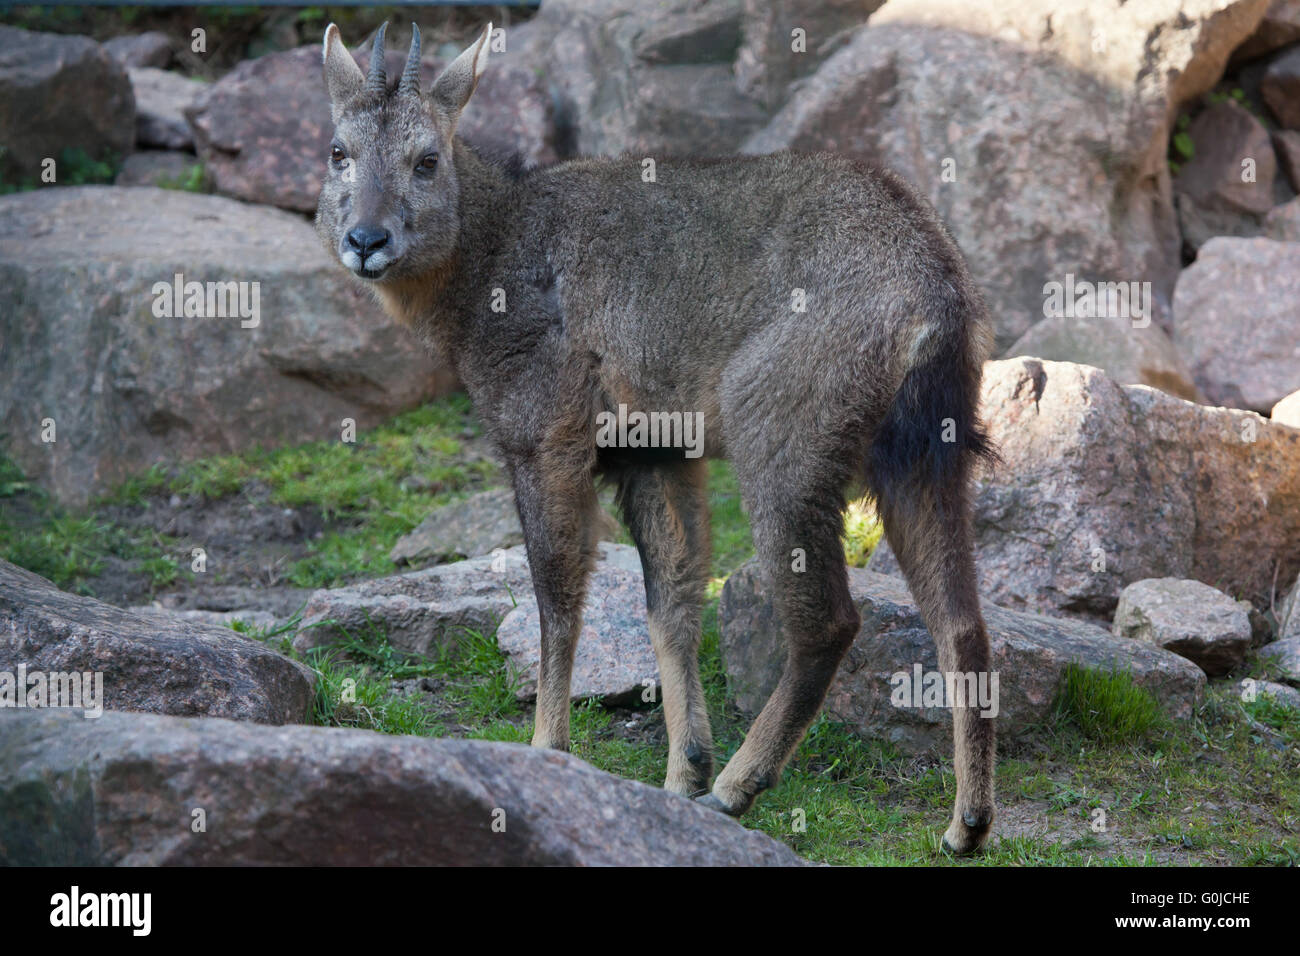 Chinese goral (Nemorhaedus griseus), also known as the grey long-tailed goral at Dresden Zoo, Saxony, Germany. Stock Photo